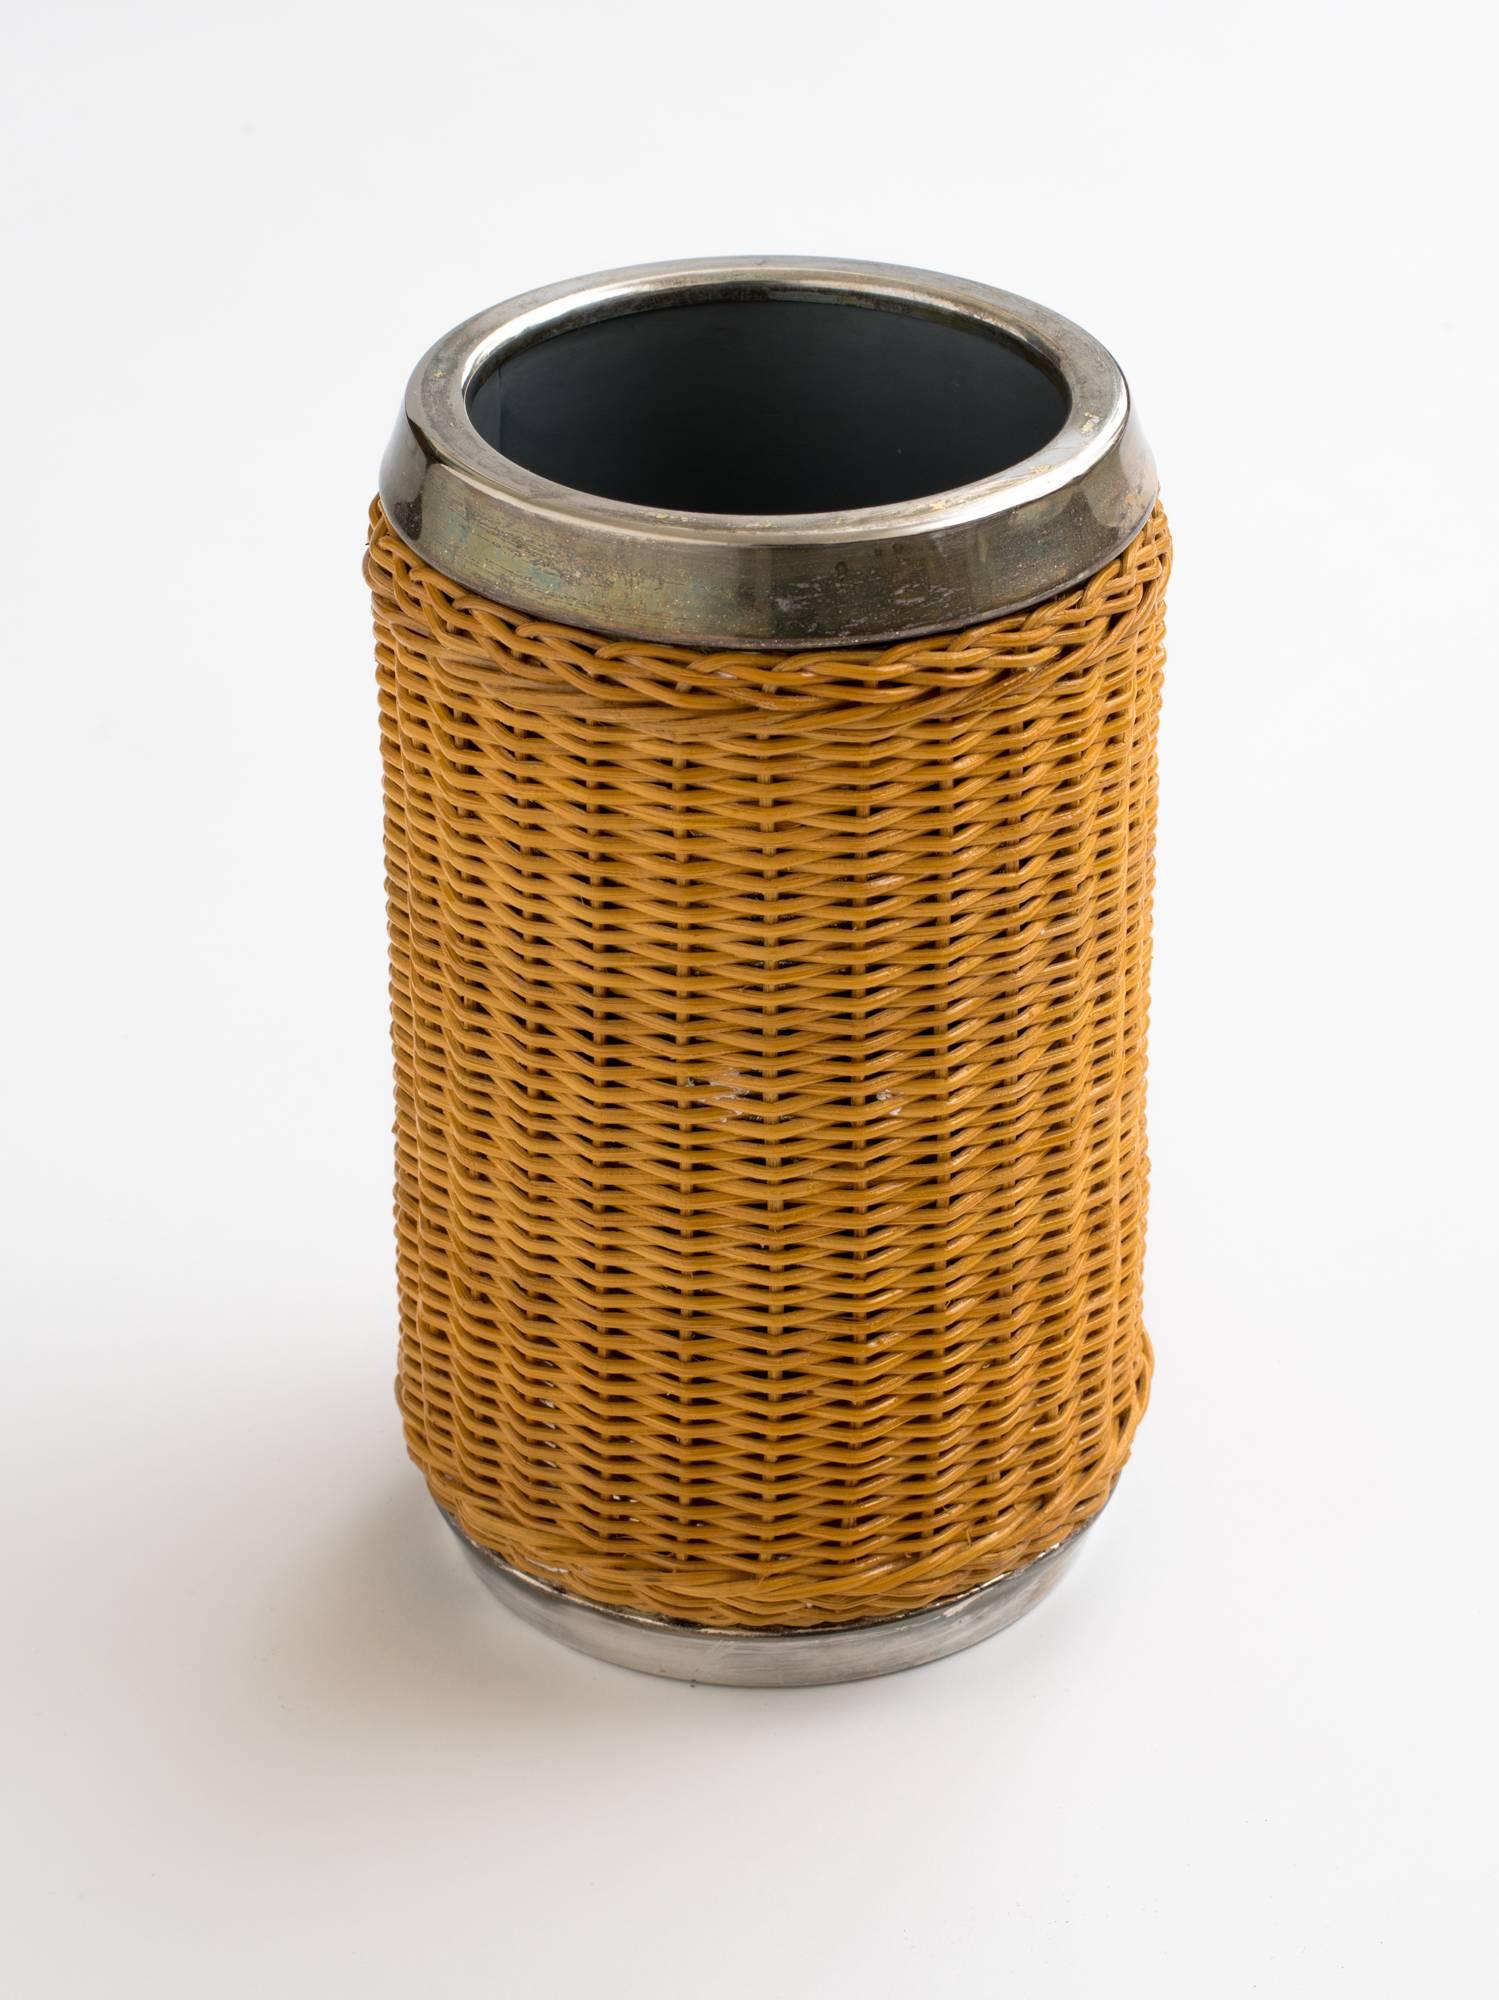 Gucci wicker wine cooler with silver plated rim and bottom. Stamped, Gucci. Made in Italy.